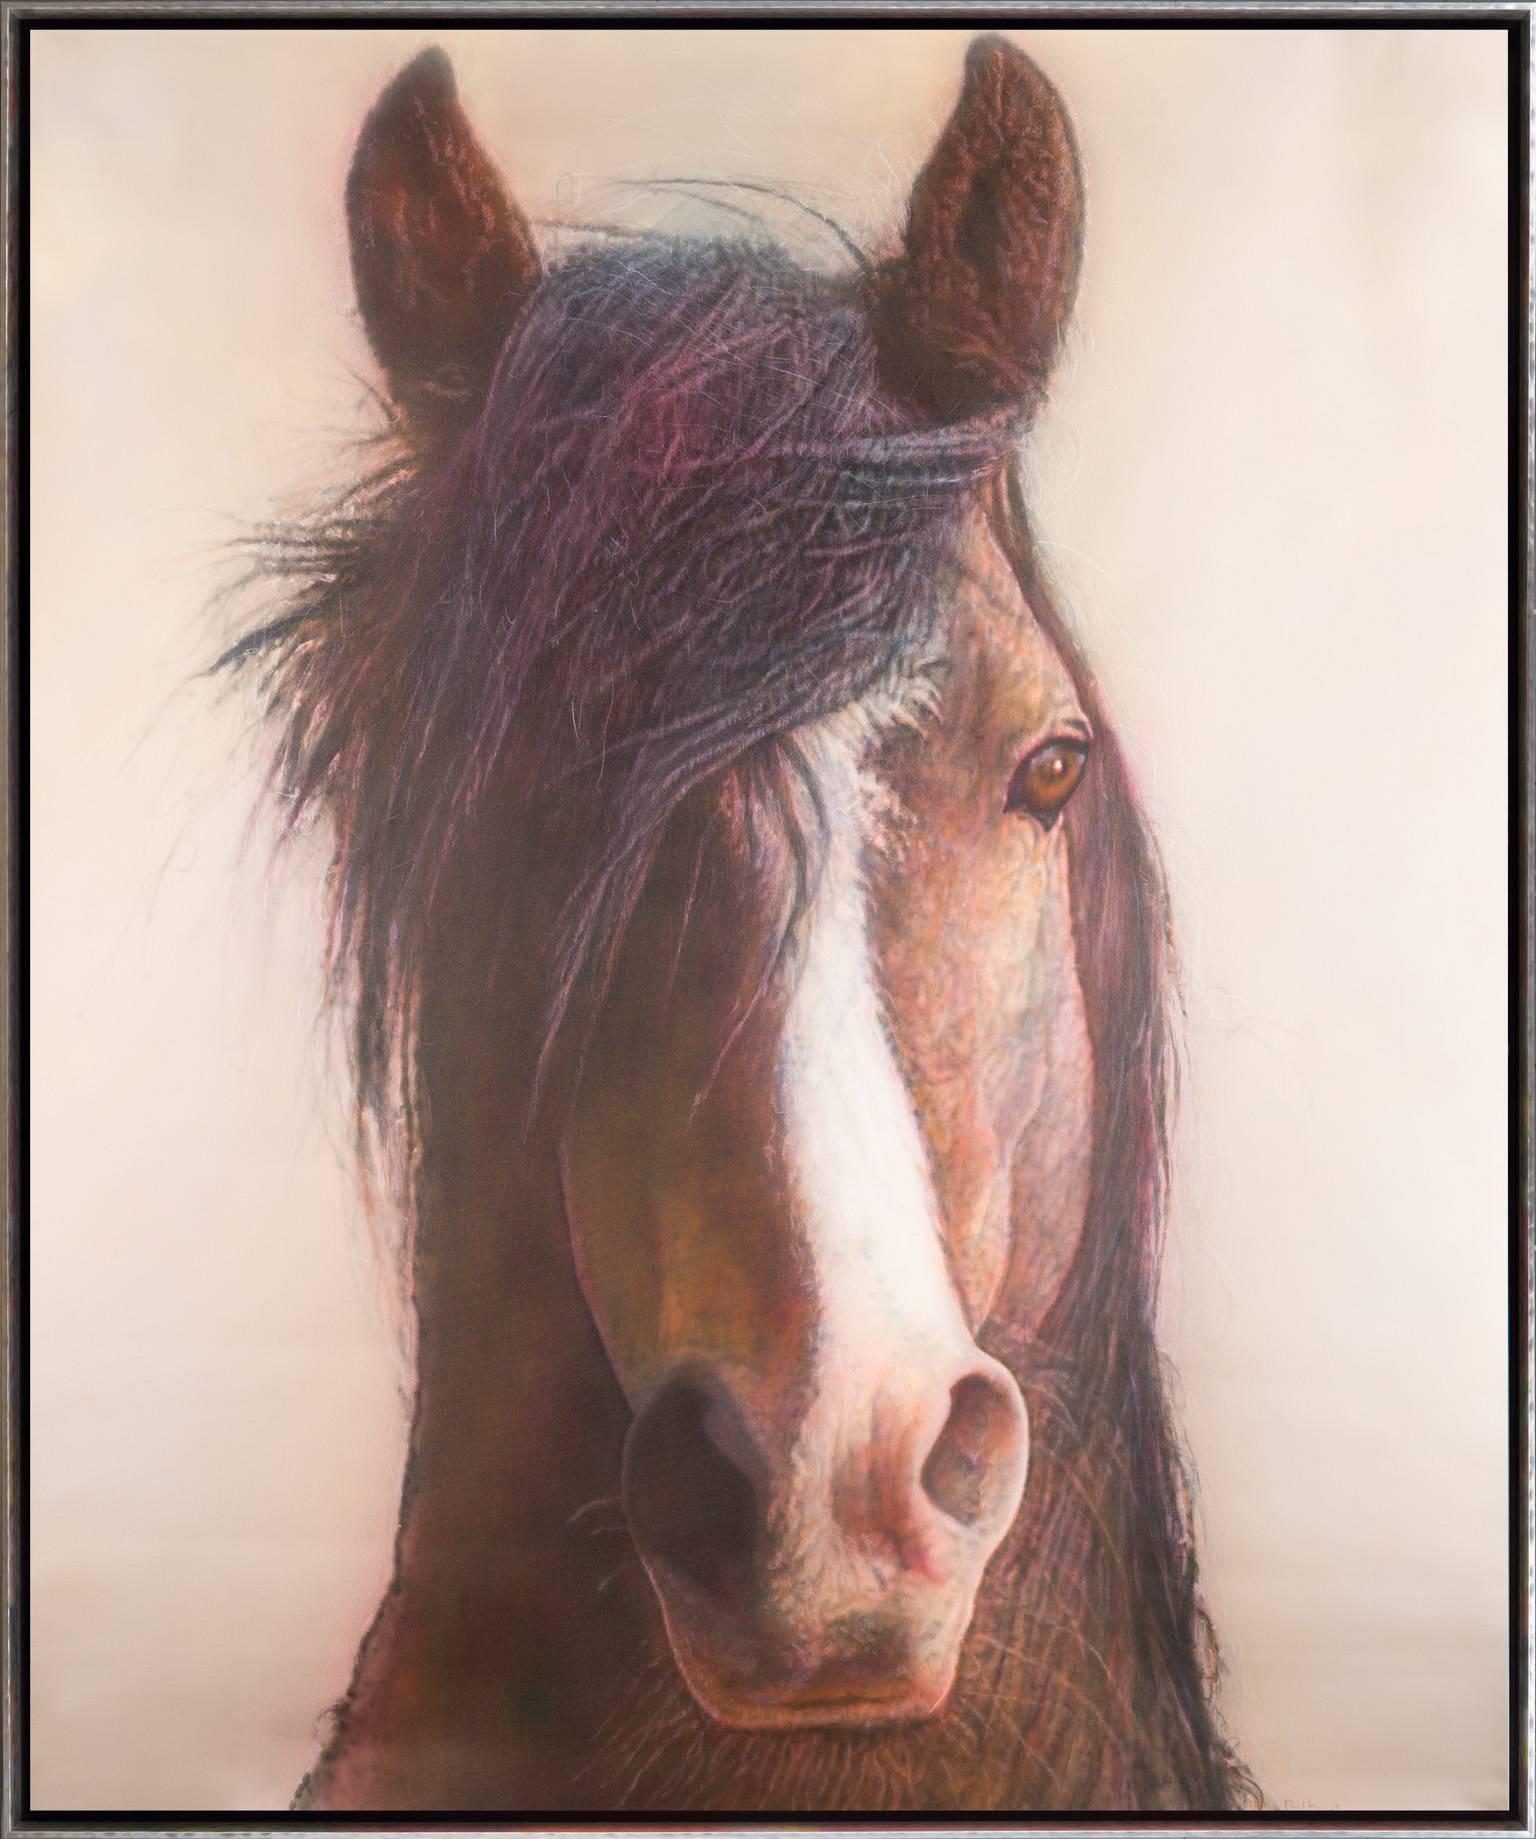 "I'll Follow You" Strikingly Realistic Horse Portrait Painting